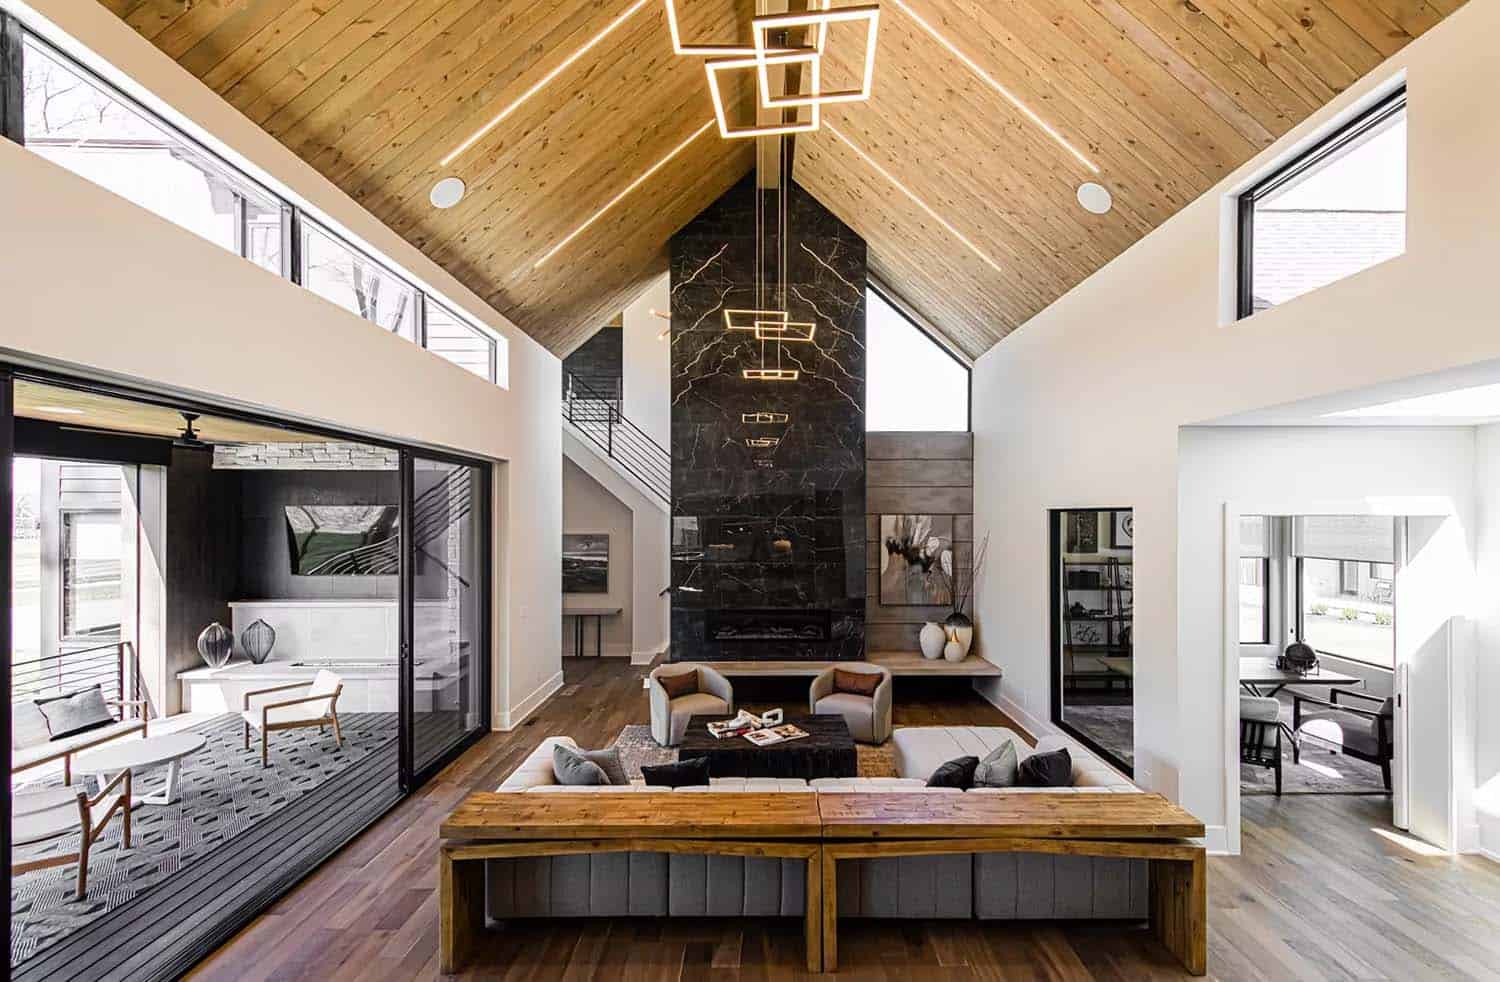 A spectacular Scandinavian modern home with hygge interiors in Indiana